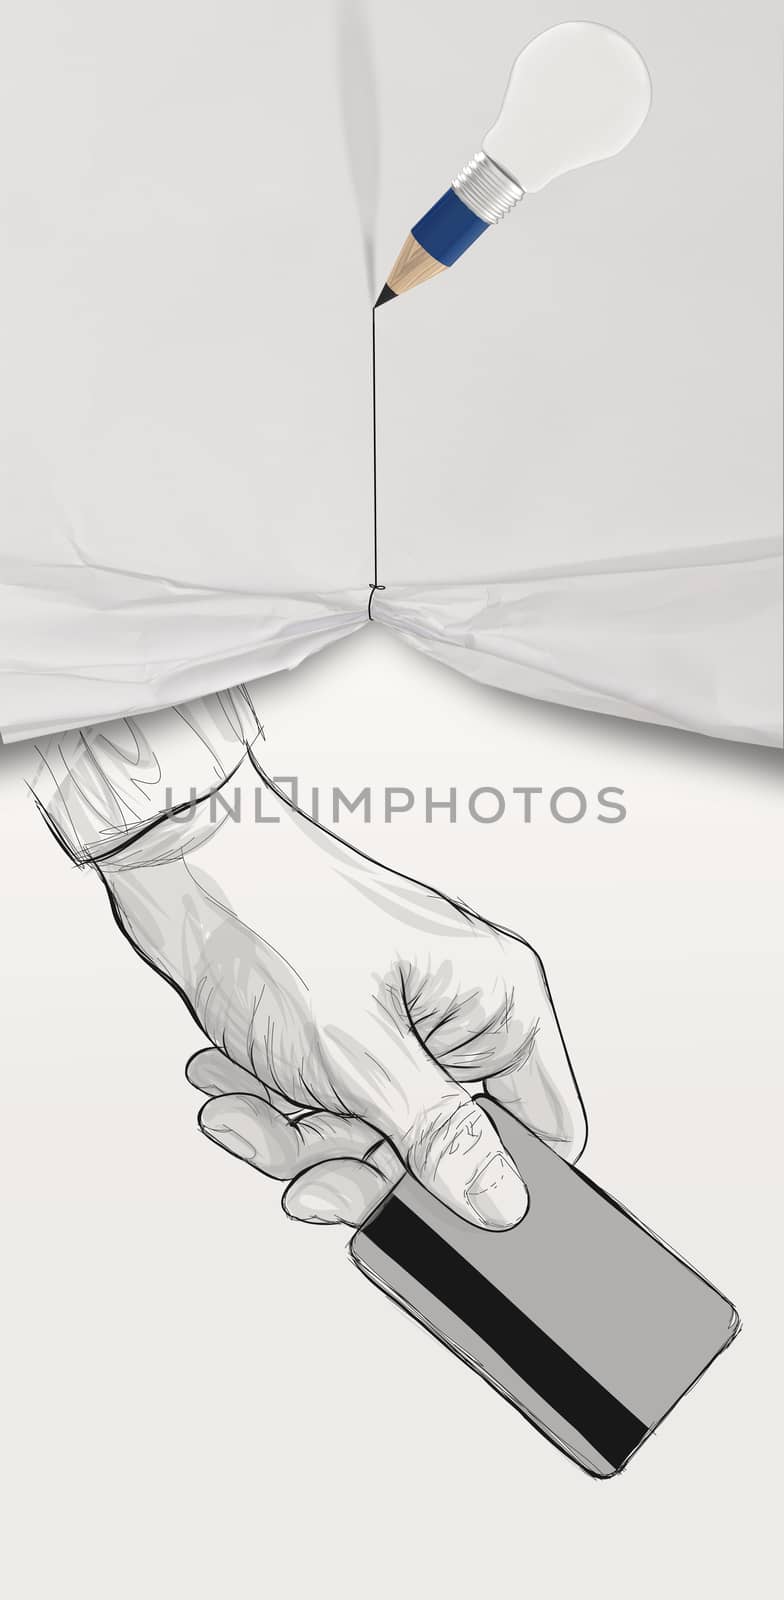 pencil lightbulb 3D draw rope open wrinkled paper show graphic  hand holding up credit card on book  as concept 